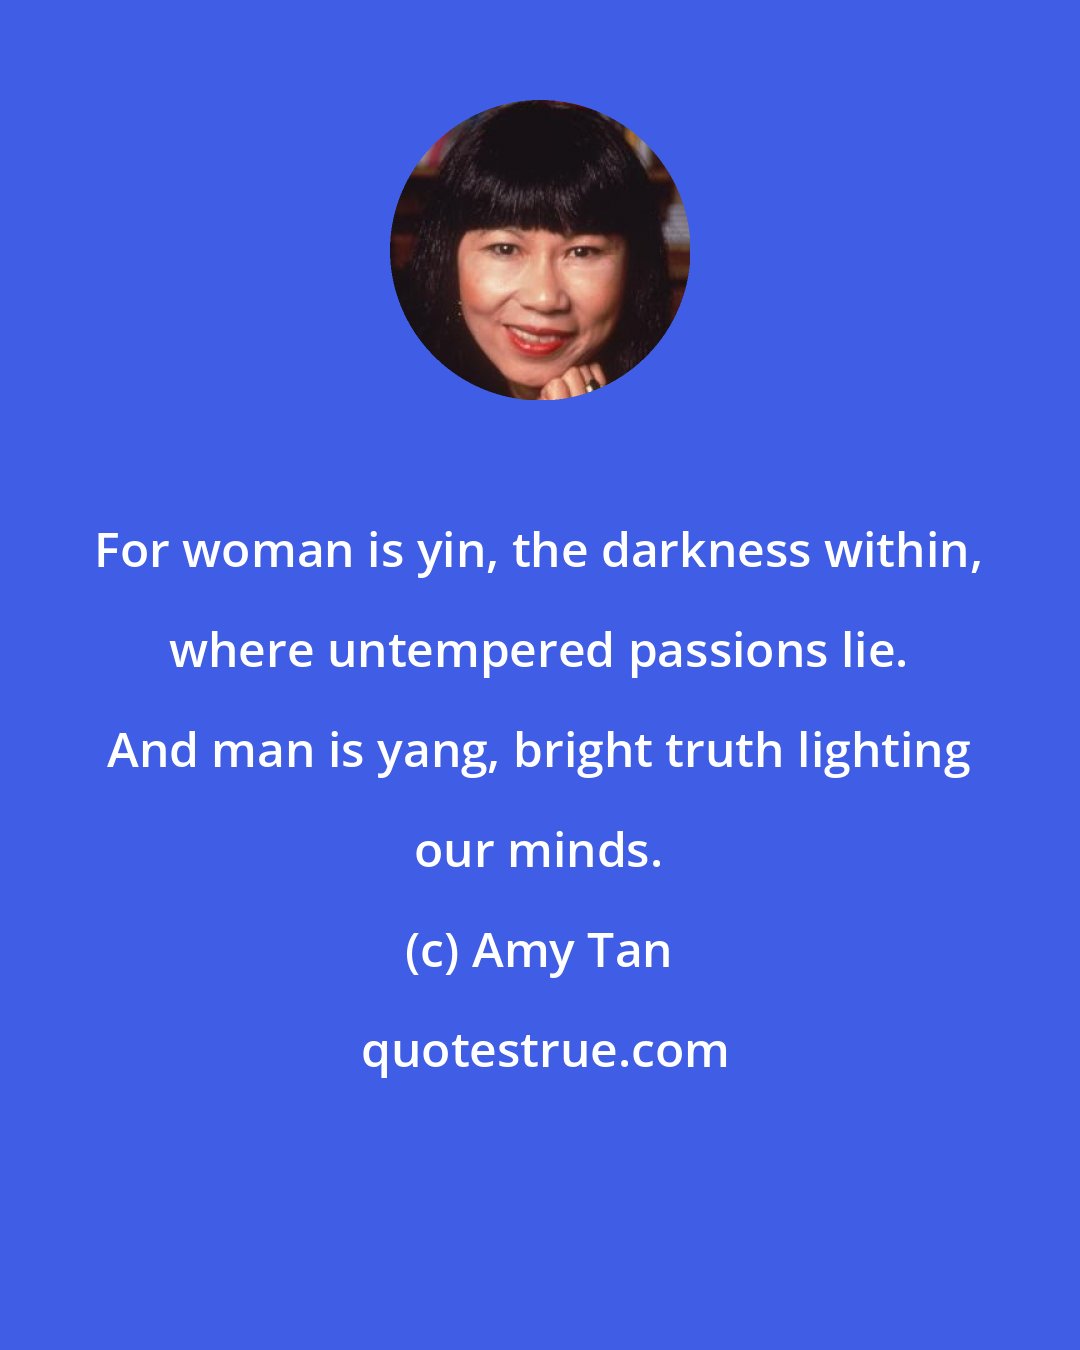 Amy Tan: For woman is yin, the darkness within, where untempered passions lie. And man is yang, bright truth lighting our minds.